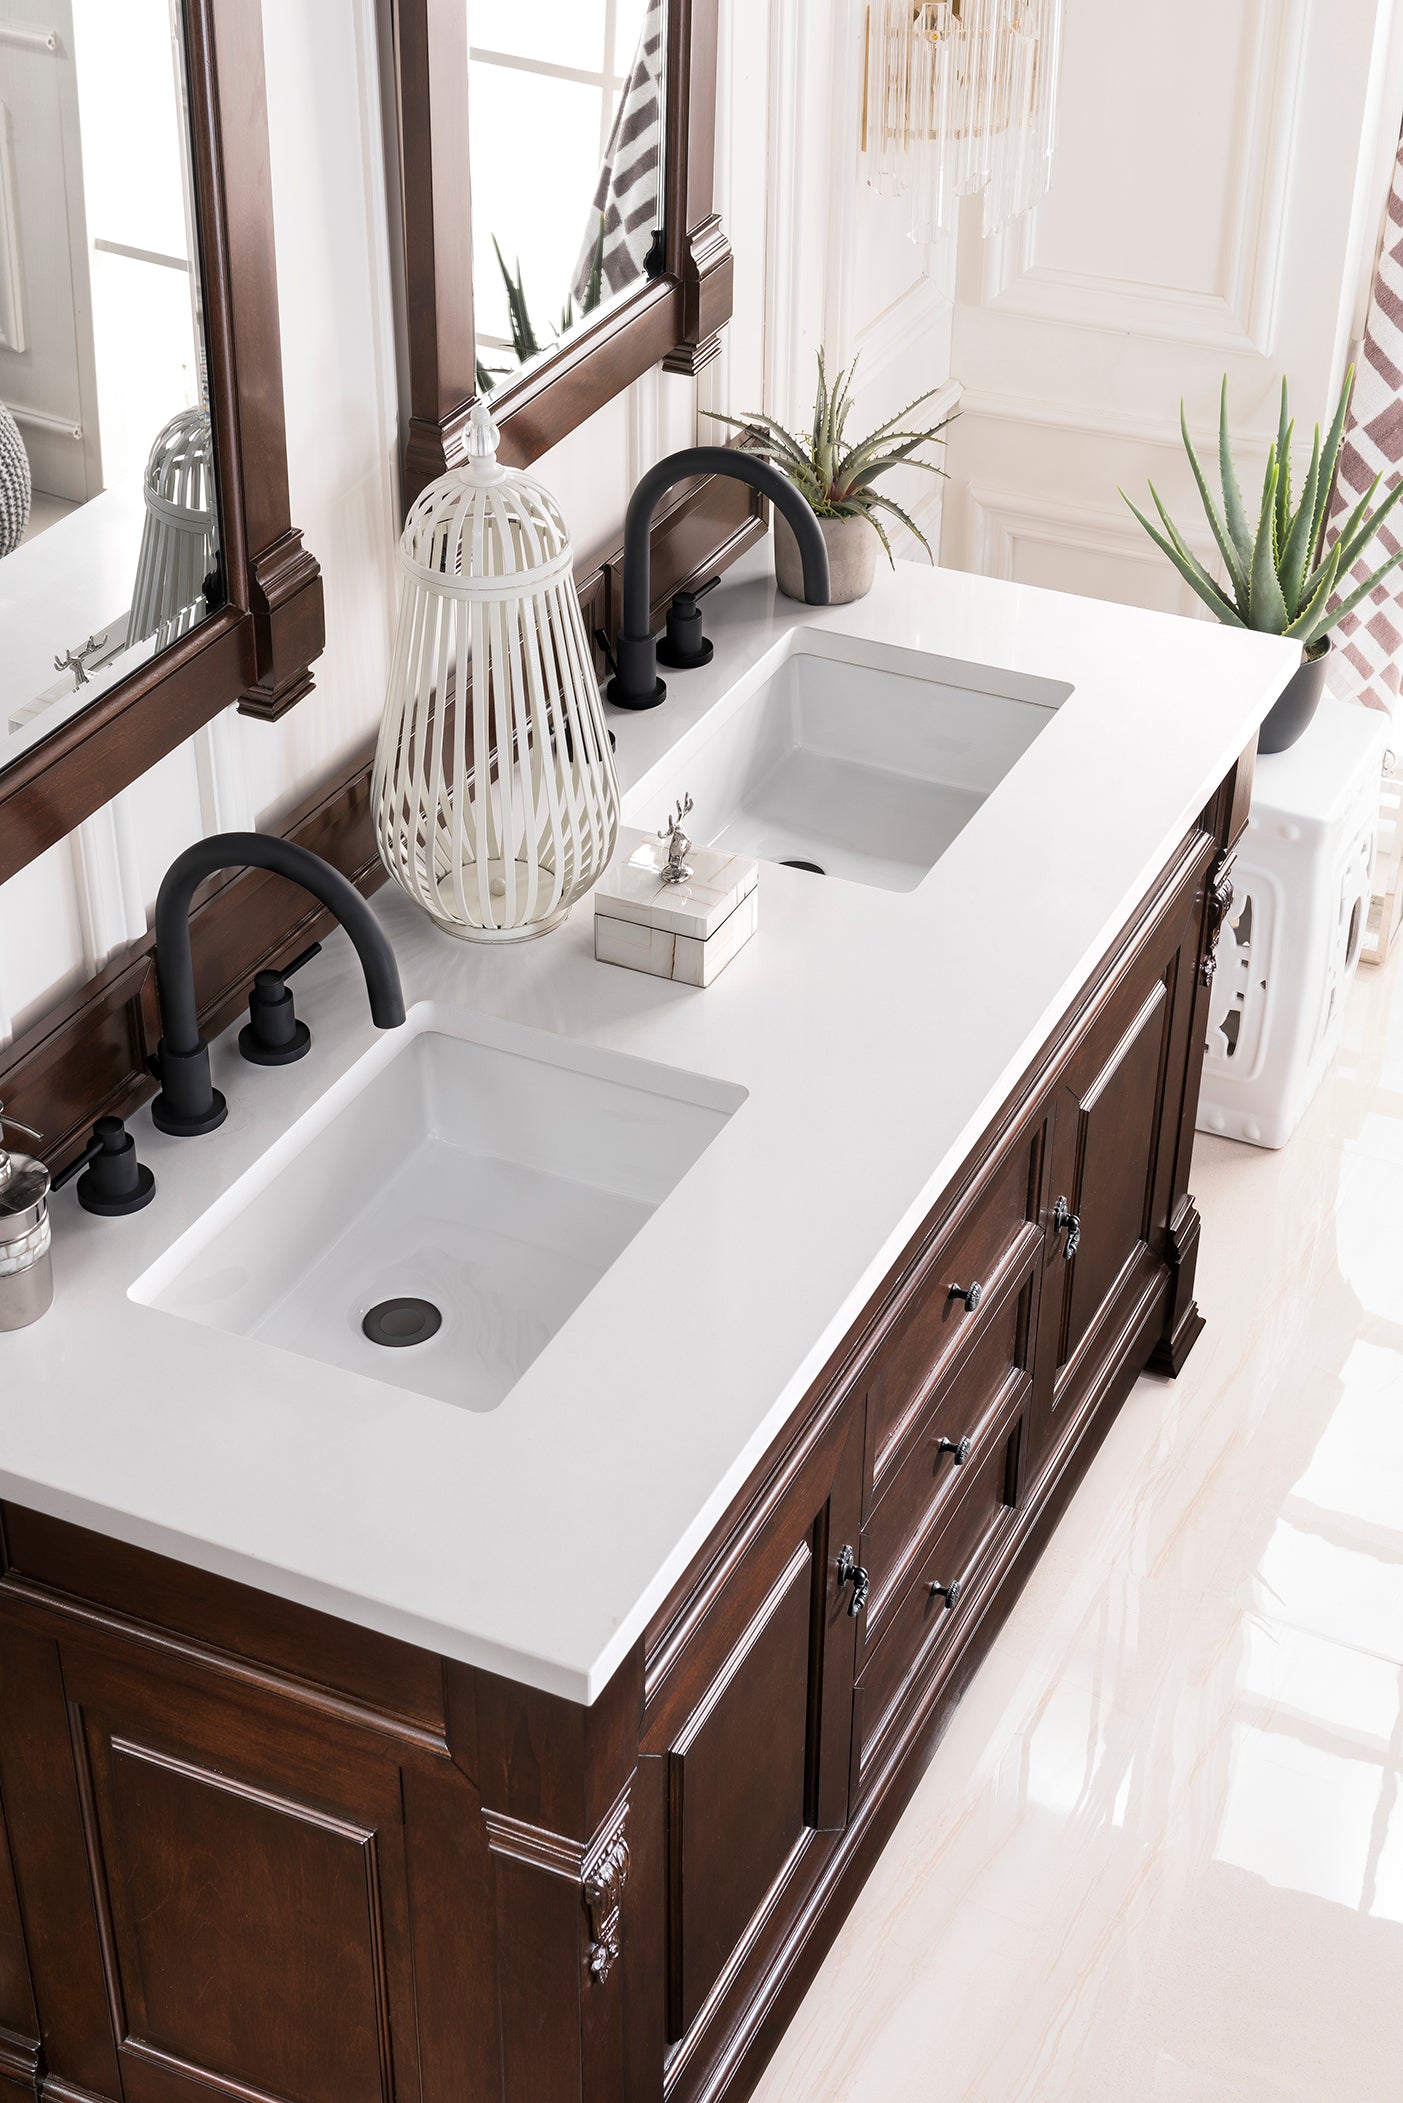 The Ultimate Guide to Selecting Luxury Bathroom Vanities for Your Home